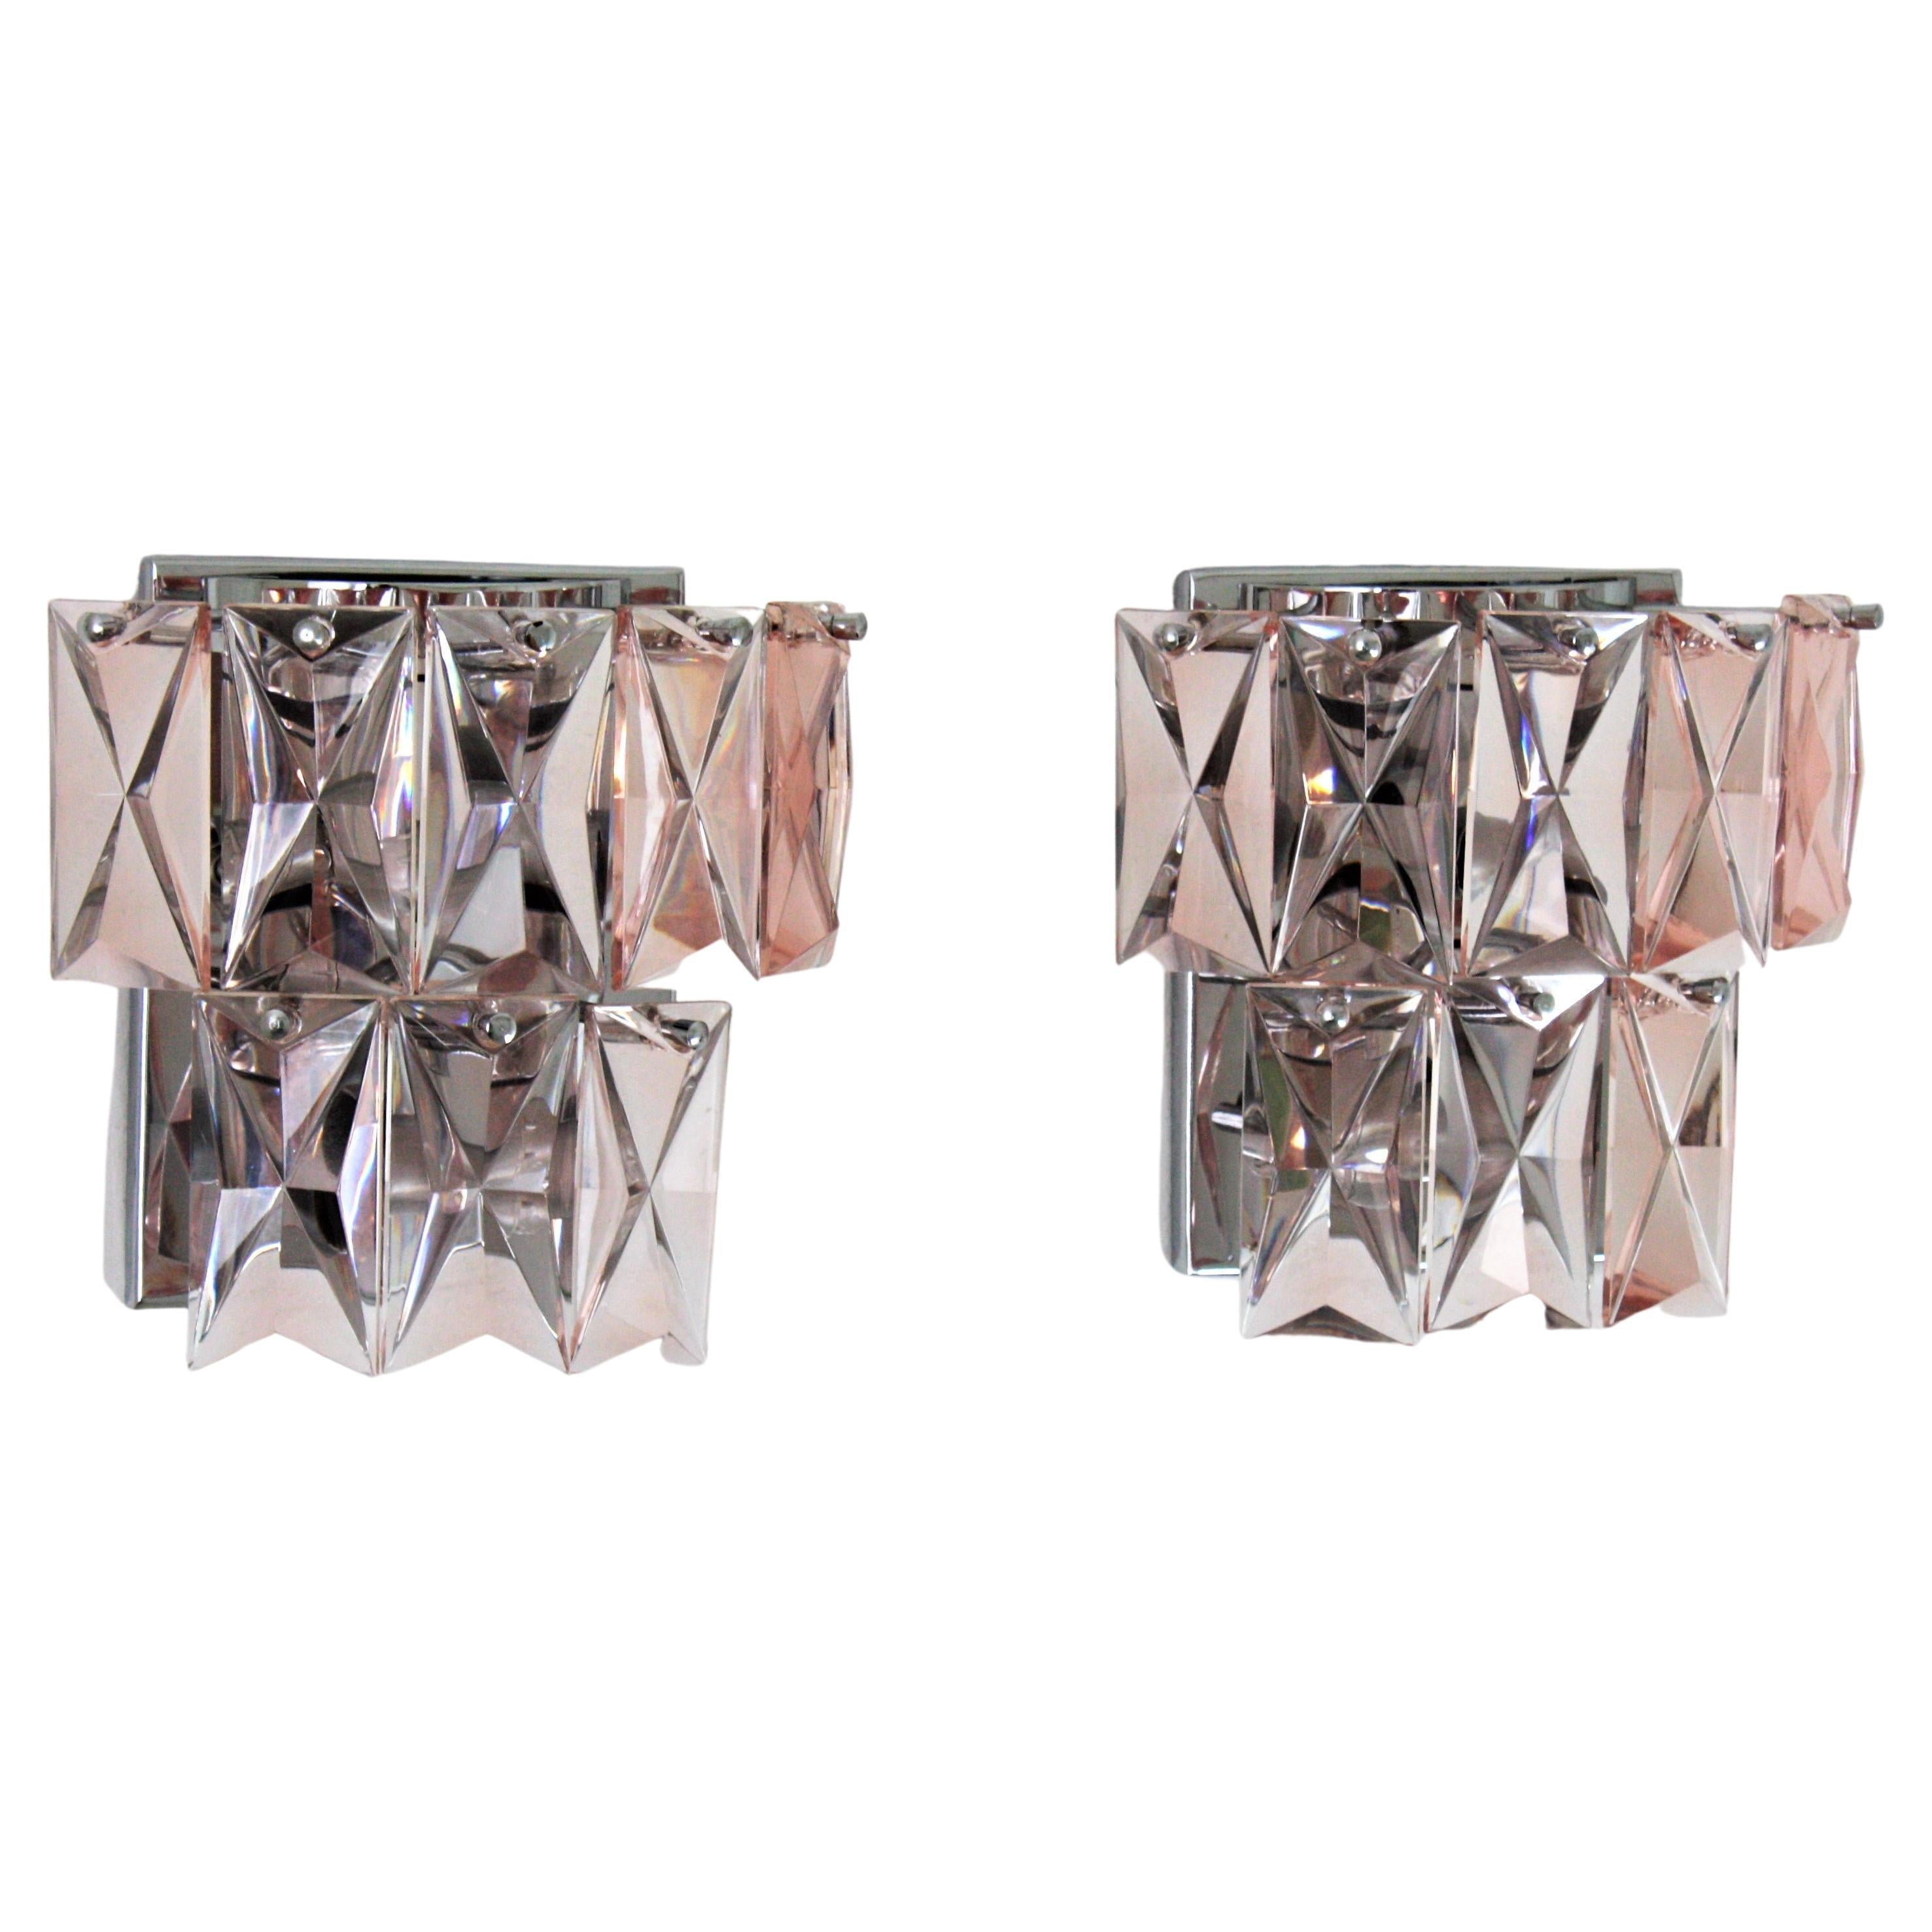 Pair of Mid-Century Modern French Baccarat style crystal wall lights in pink color.
A pair of Mid-Century Modern Baccarat style crystal wall sconces. Each one is made by 8 rectangular shaped PINK crystal pieces. All of them placed on a polished